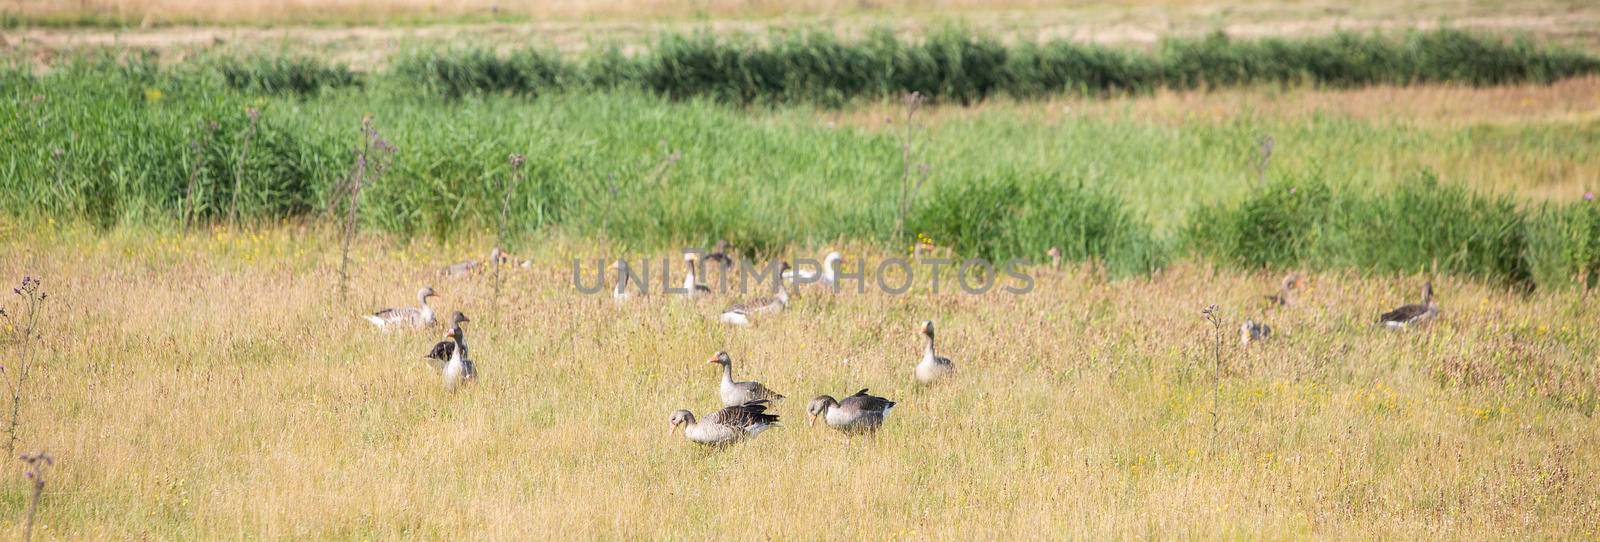 grey geese in summer grass on the island of texel in the netherlands by ahavelaar